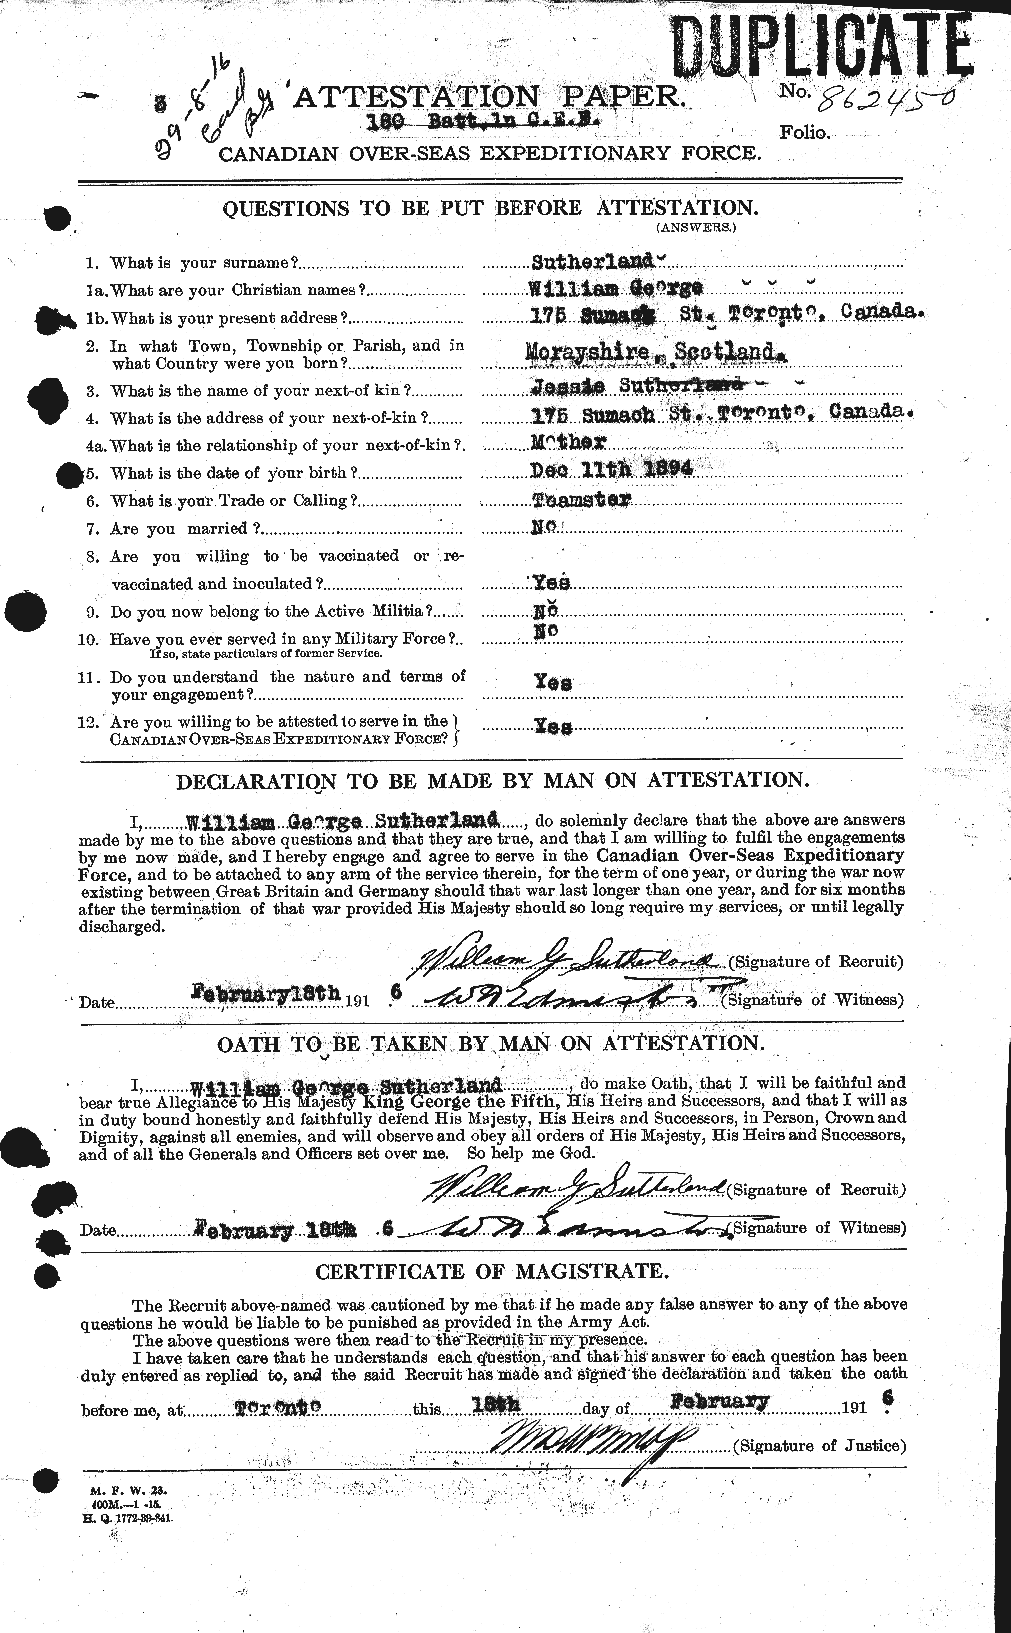 Personnel Records of the First World War - CEF 126430a